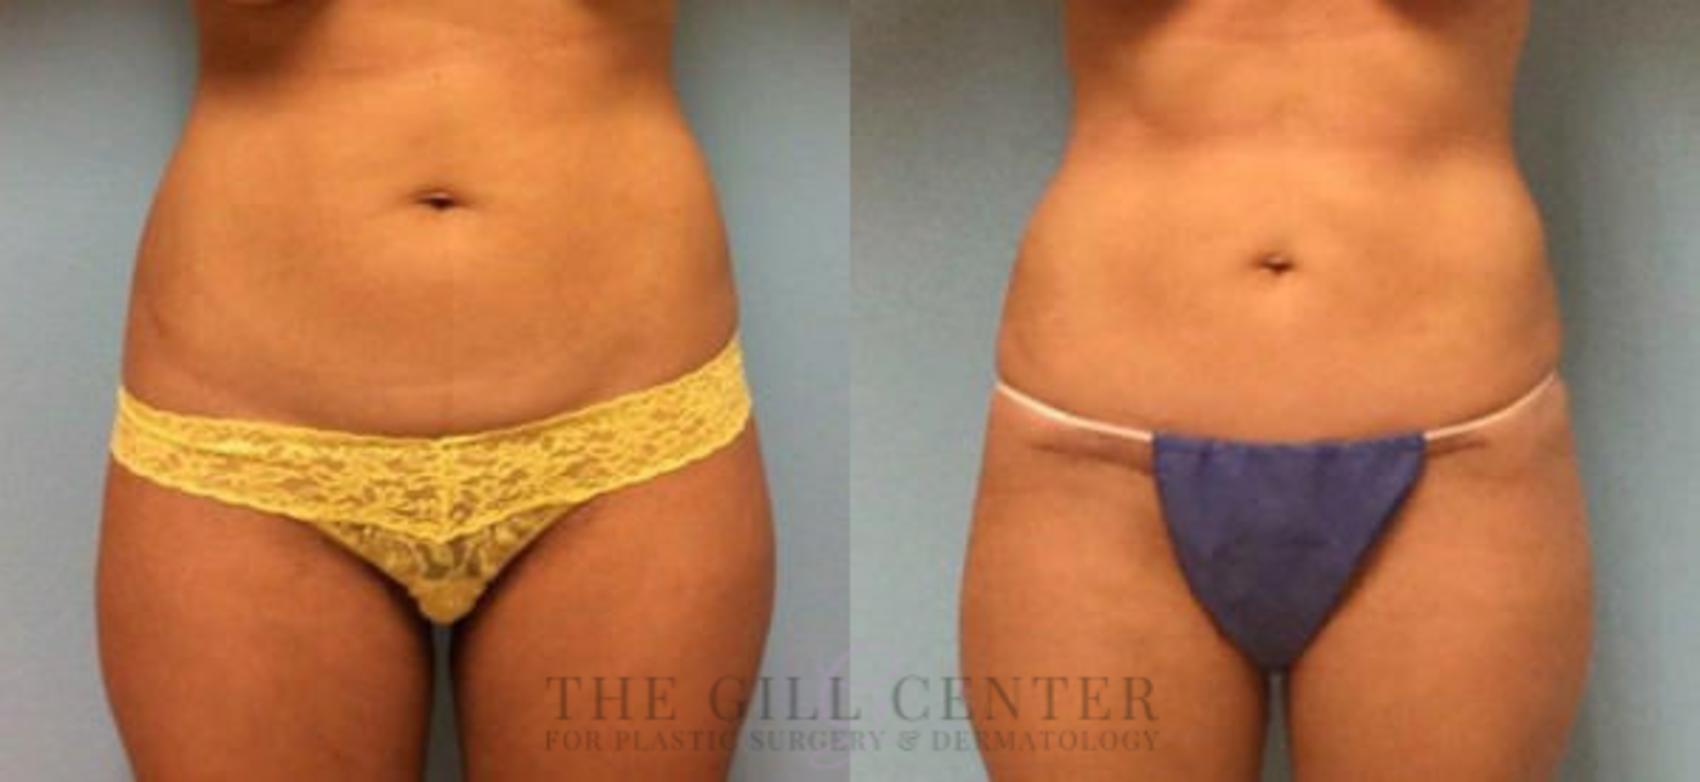 Tummy Tuck Case 222 Before & After Front | The Woodlands, TX | The Gill Center for Plastic Surgery and Dermatology